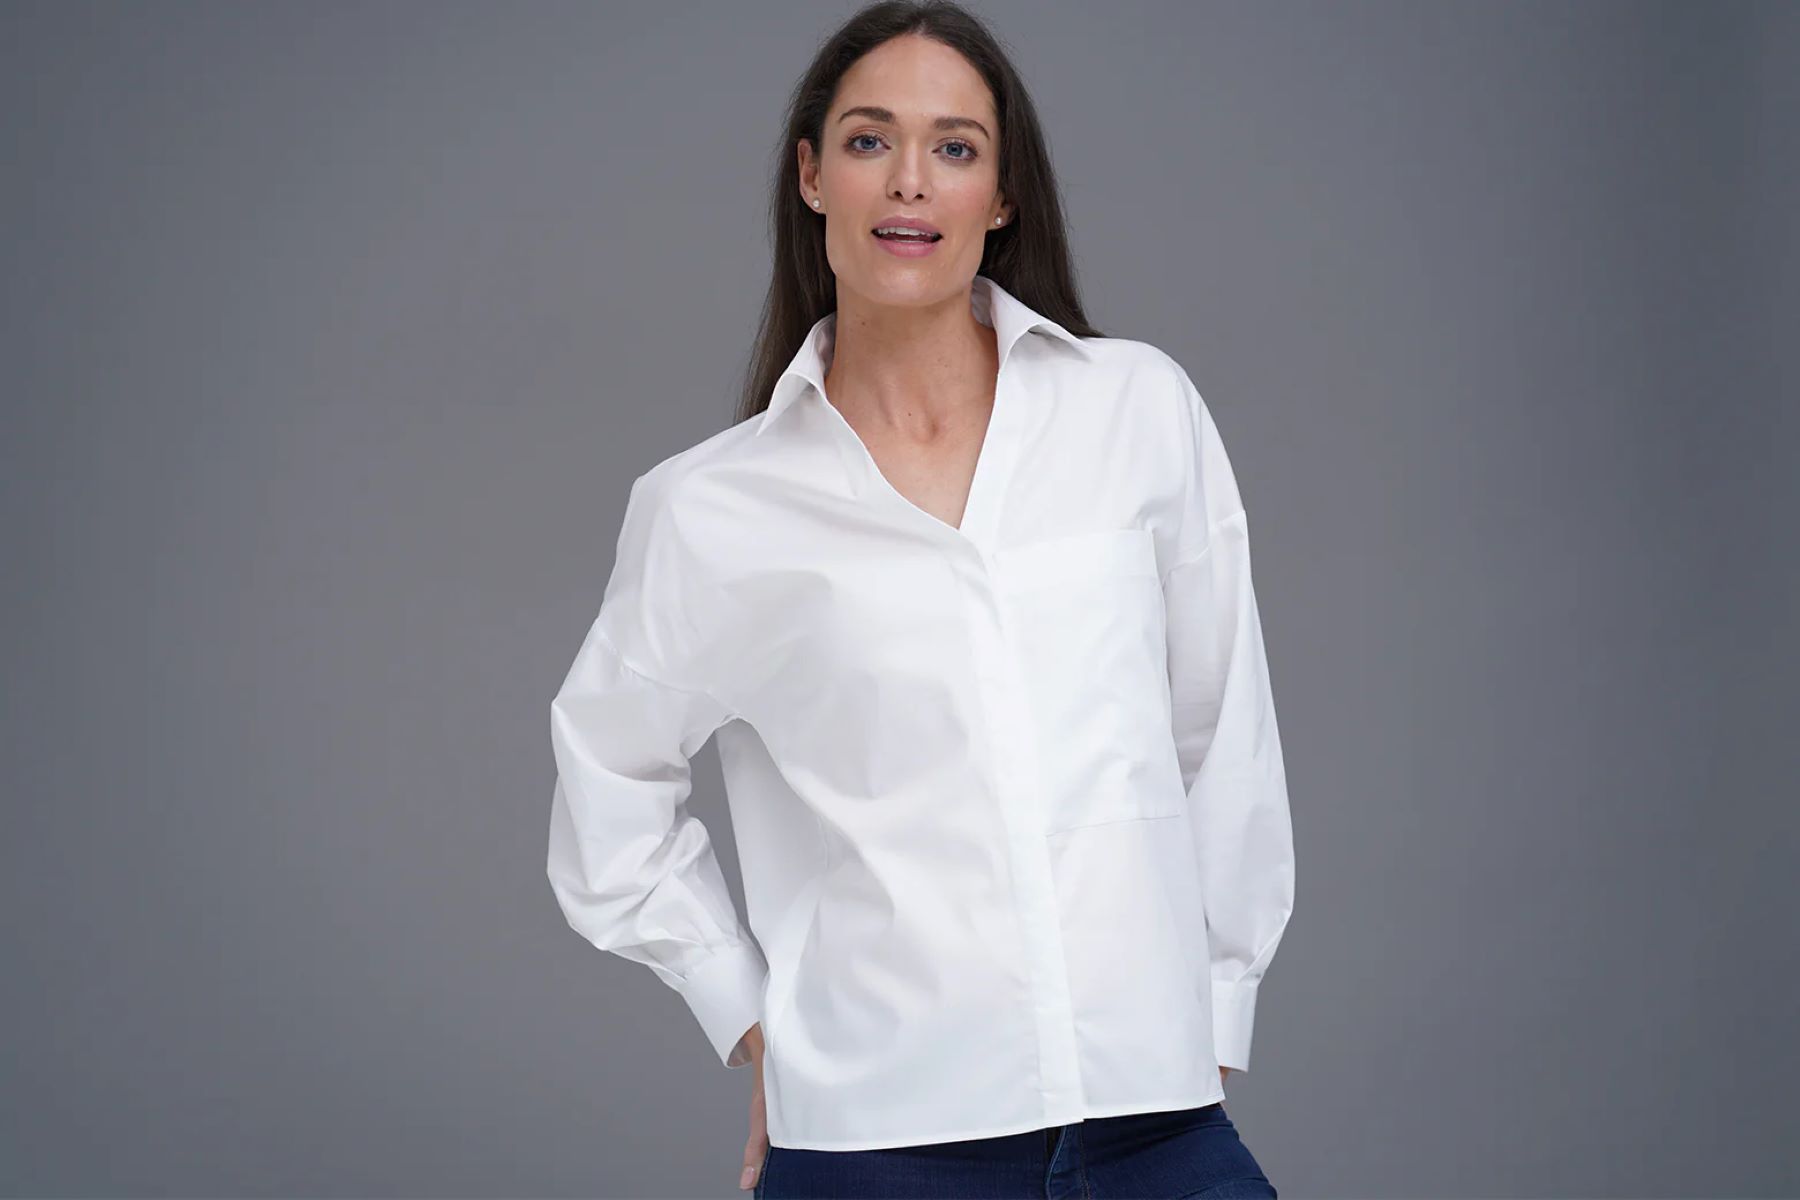 10 Elegant And Stylish Formal Shirts For Women You Need To See!